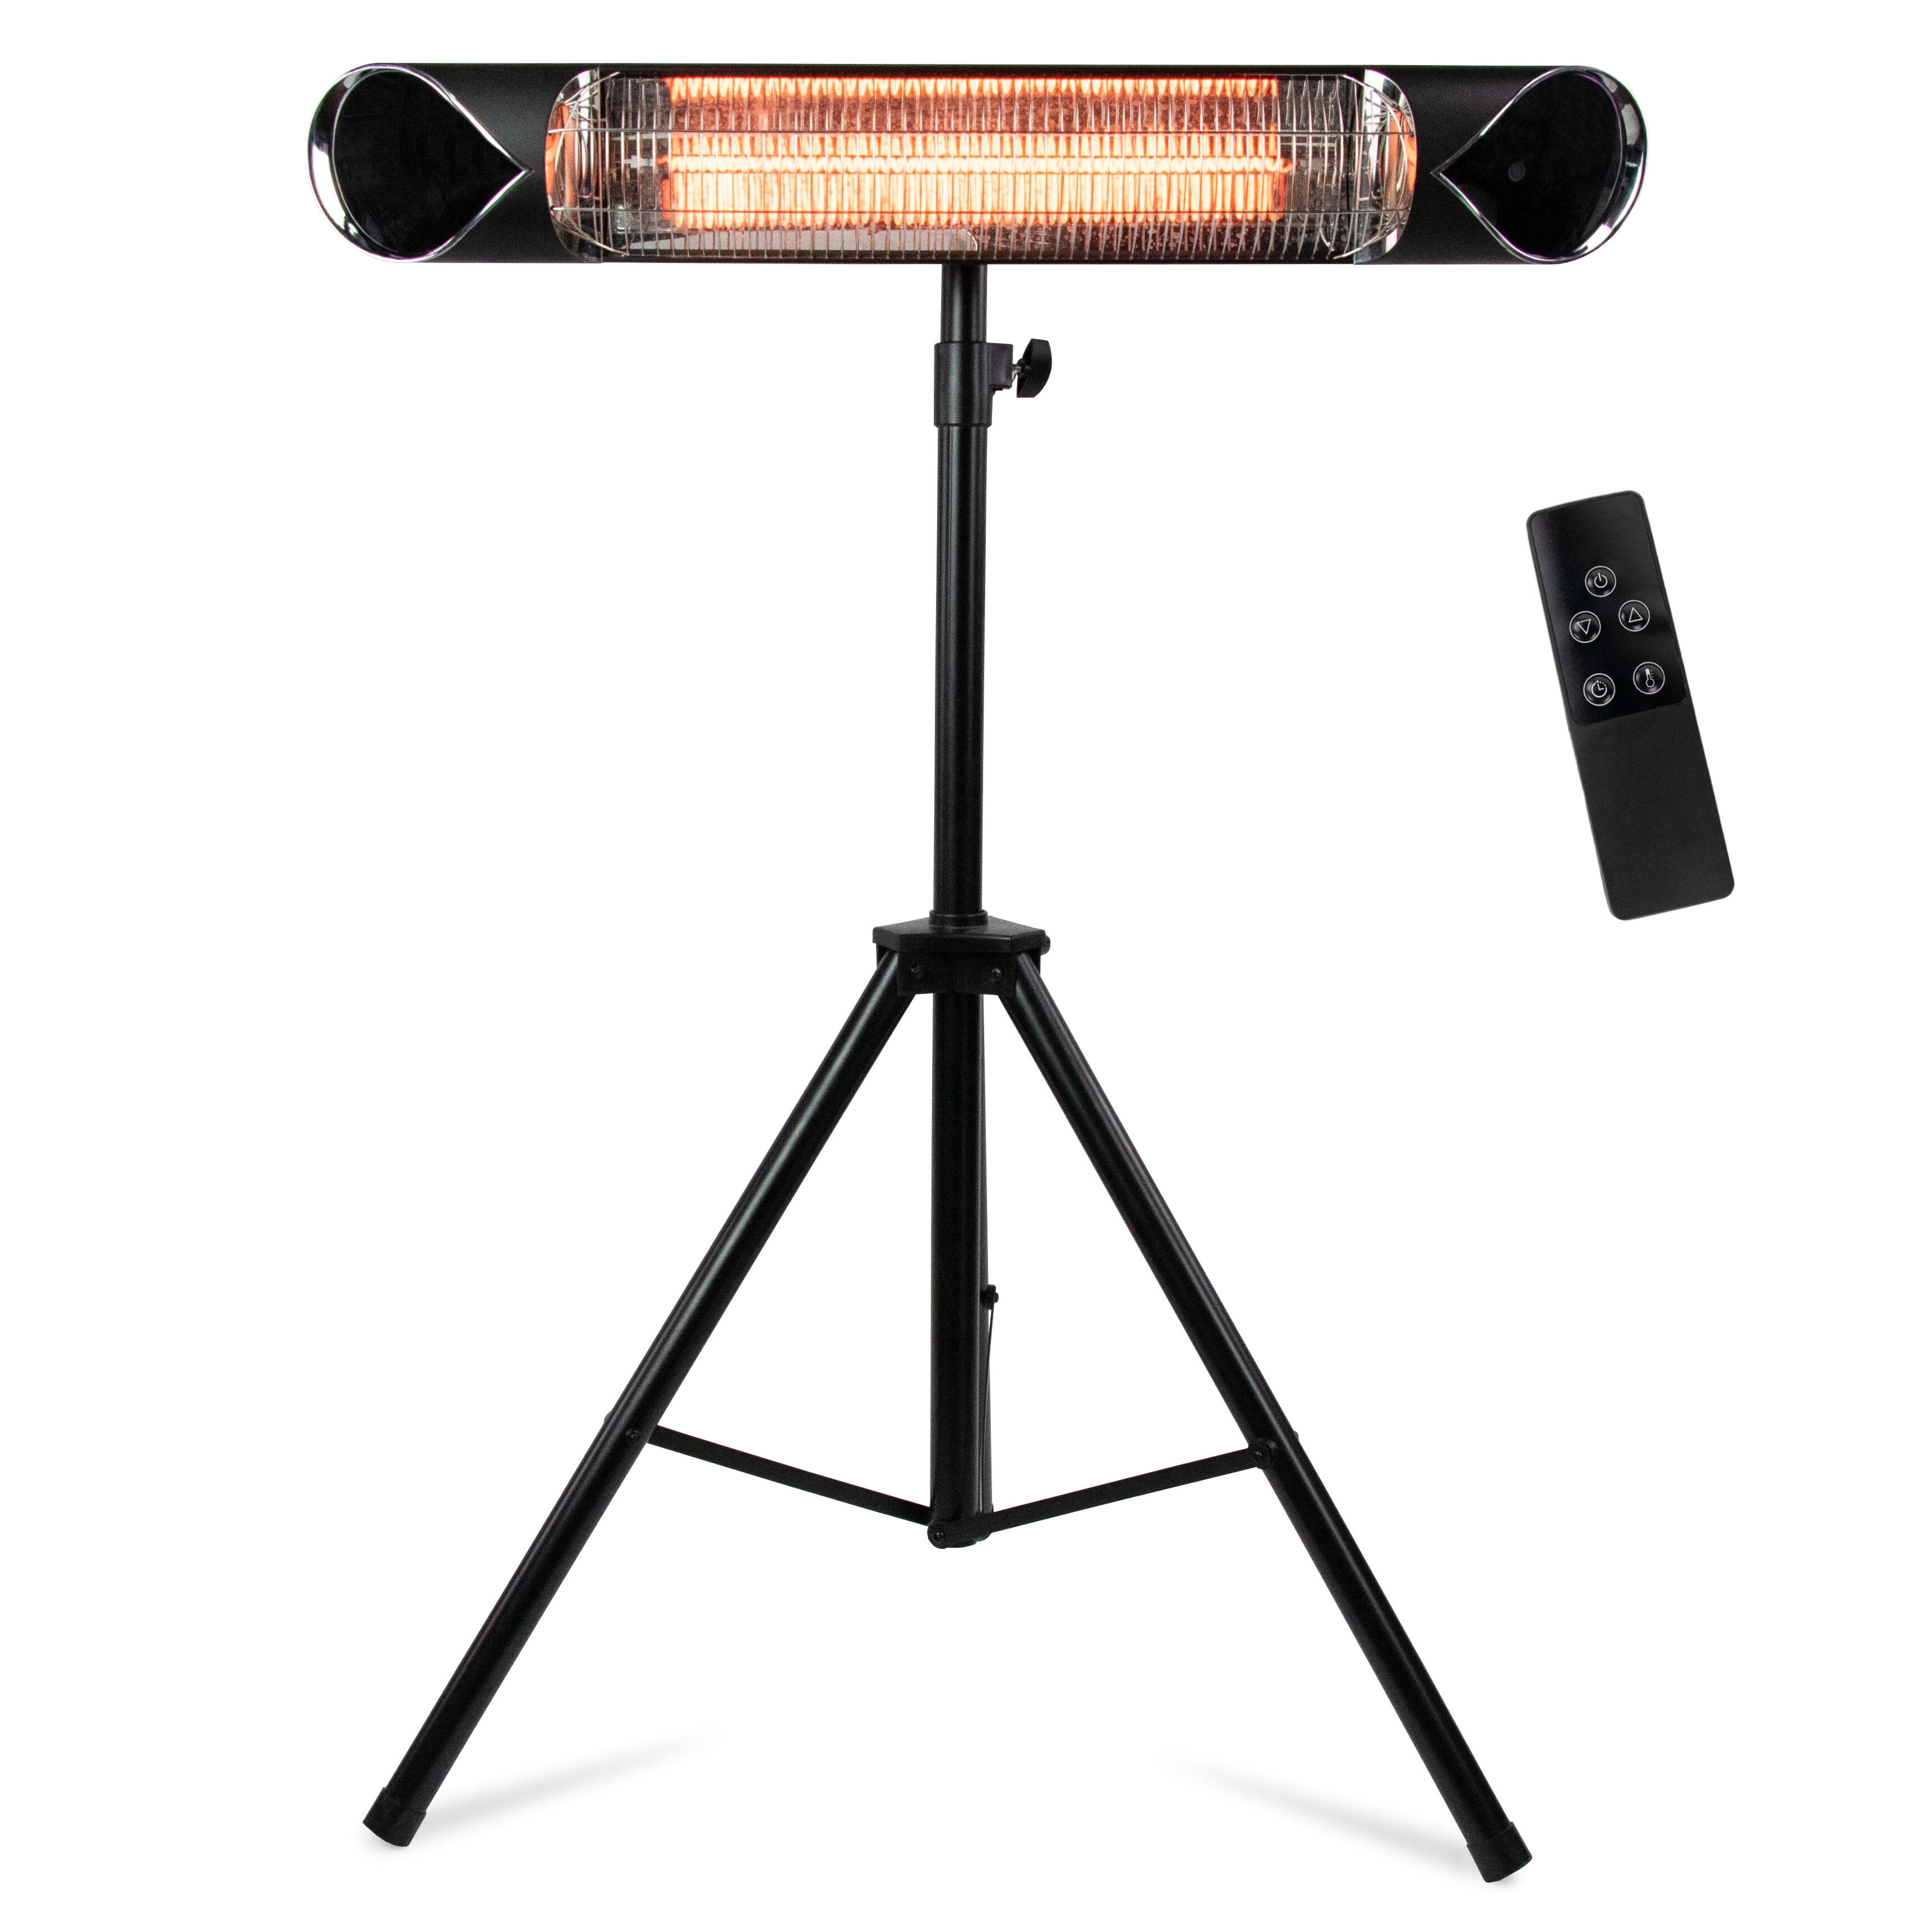 Briza Patio Heater Infrared, Infrared Patio Heater Safety